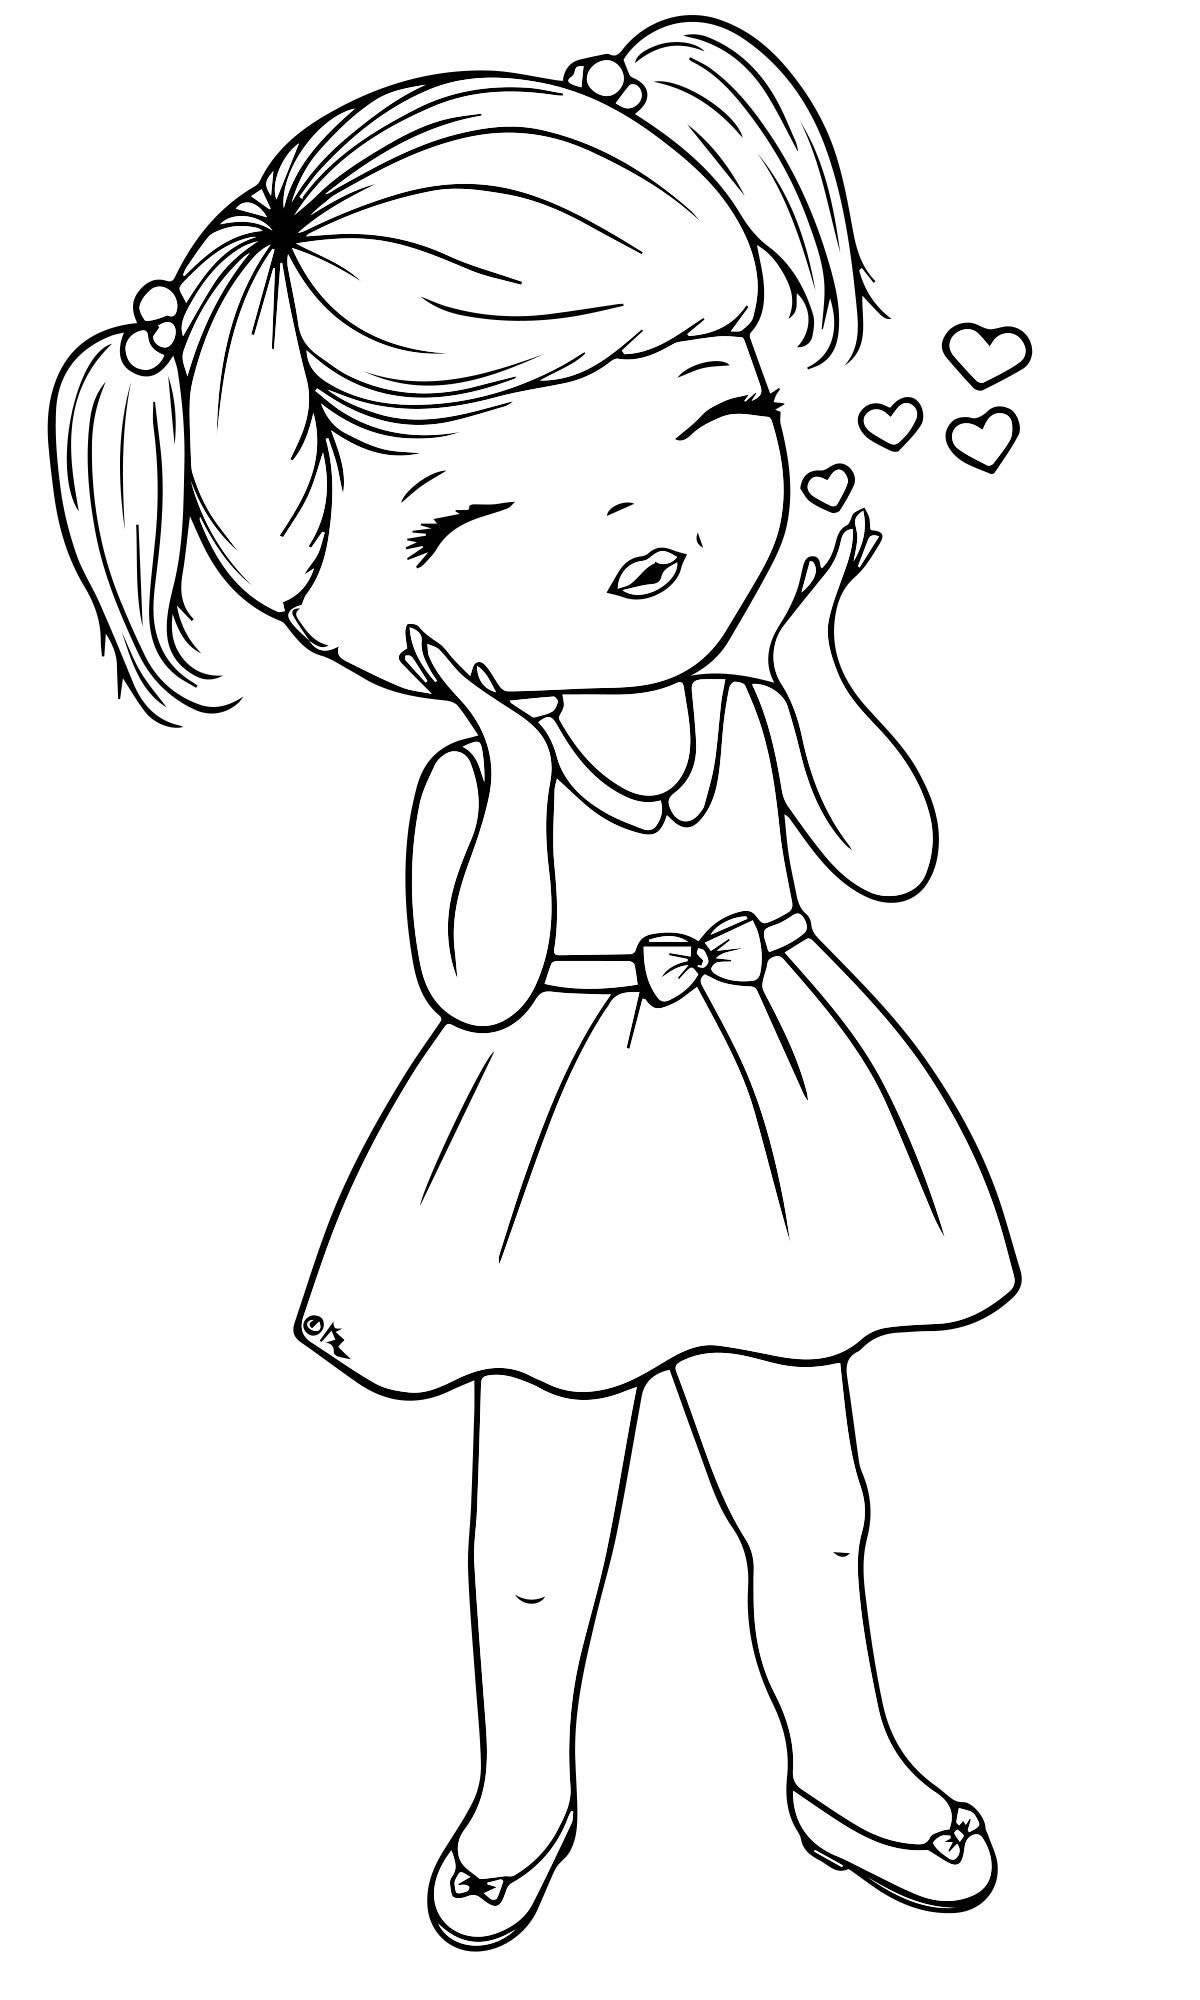 Sweet coloring bw for girls